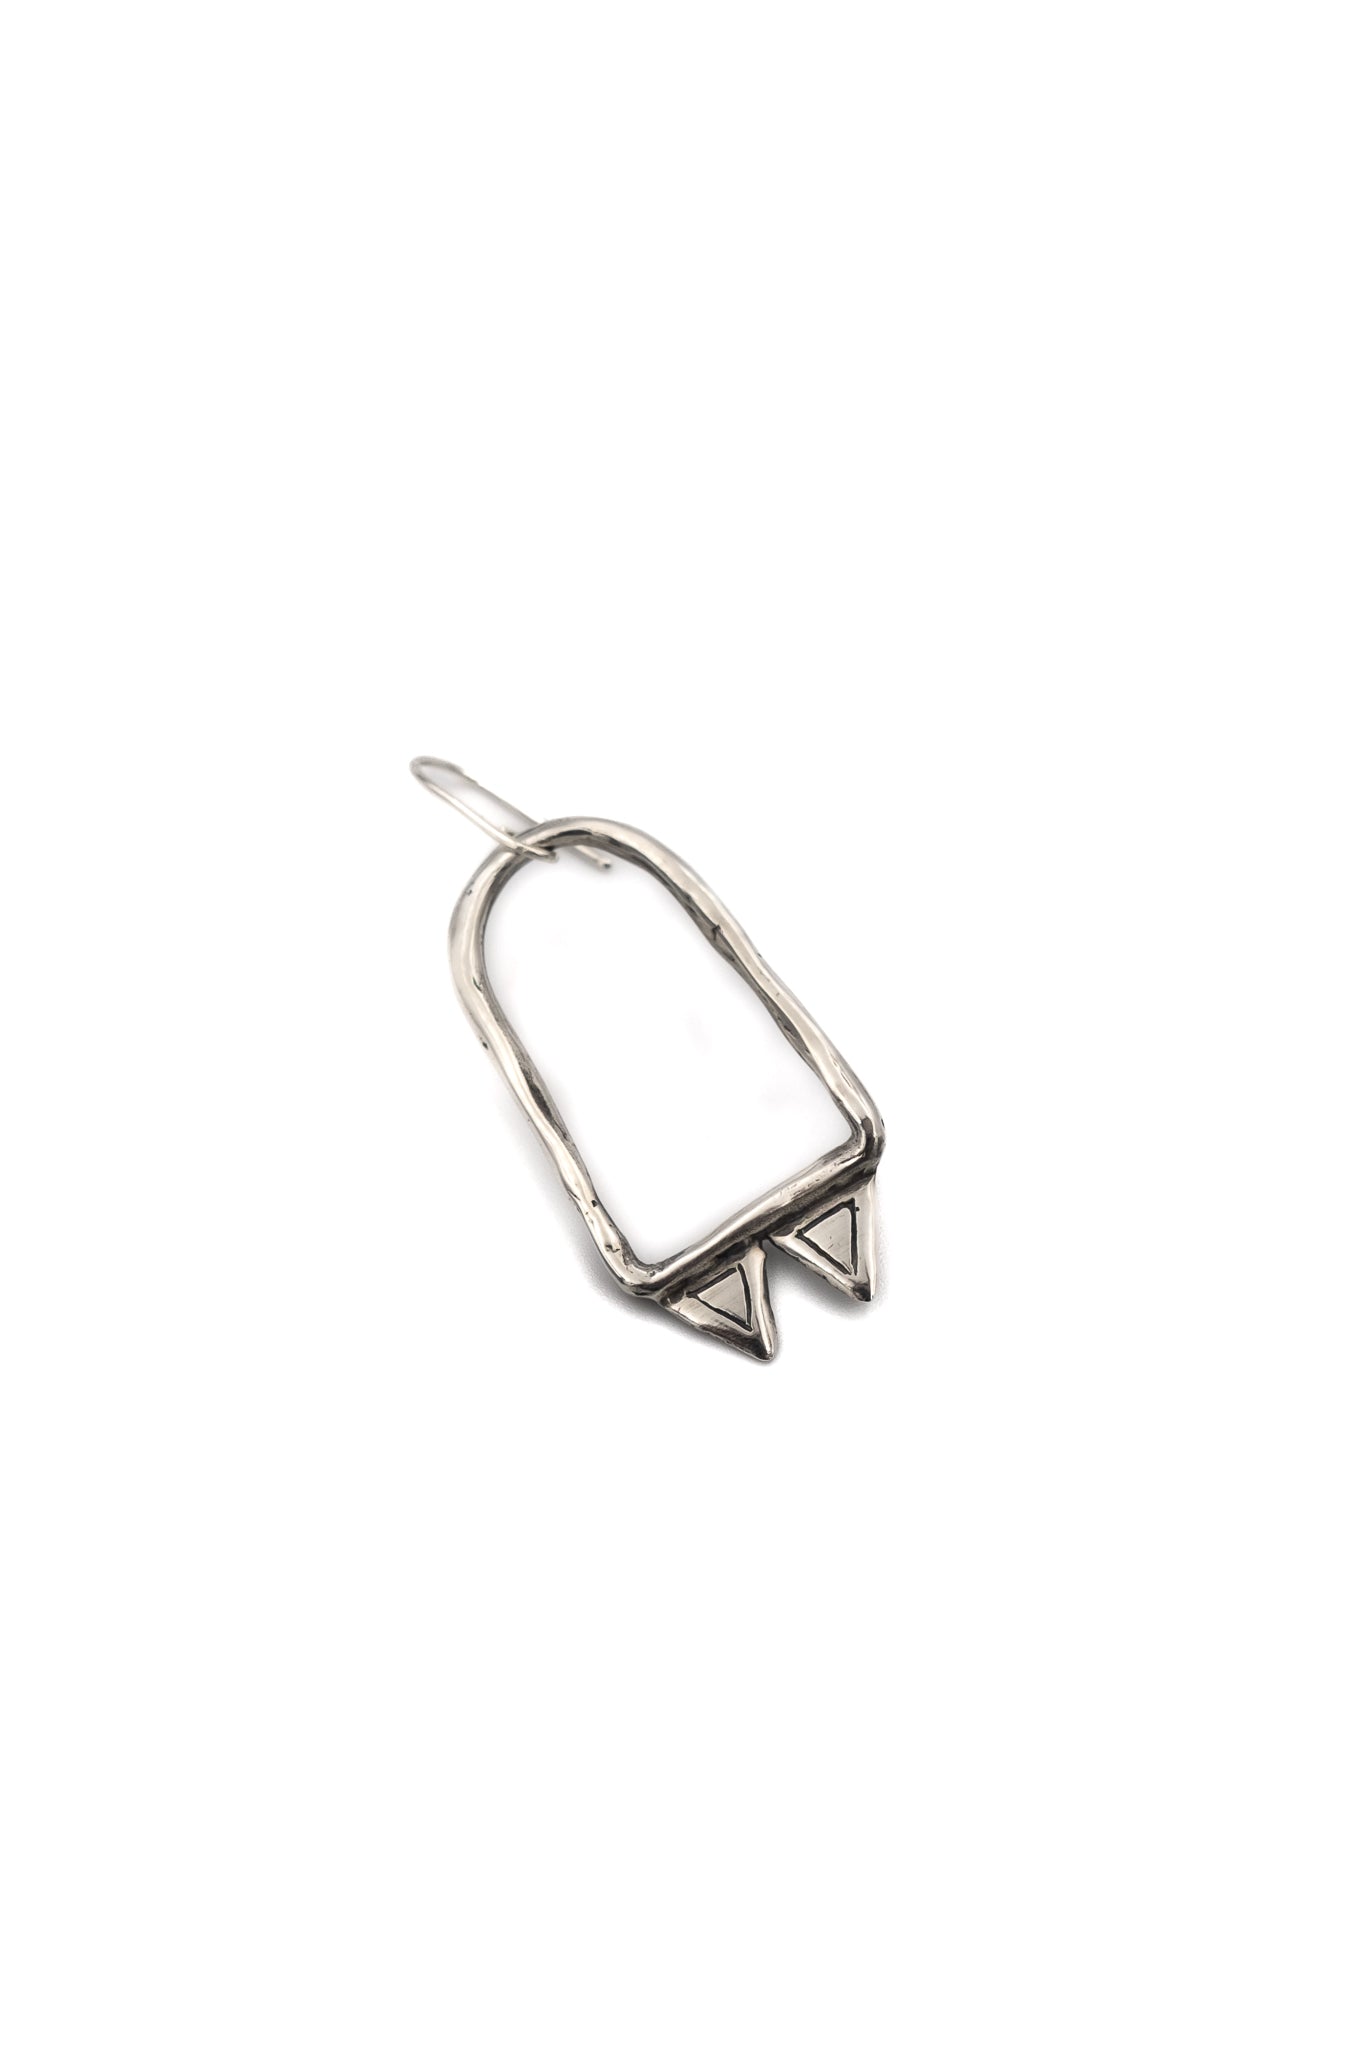 Pyramid Chamber Earrings in Silver